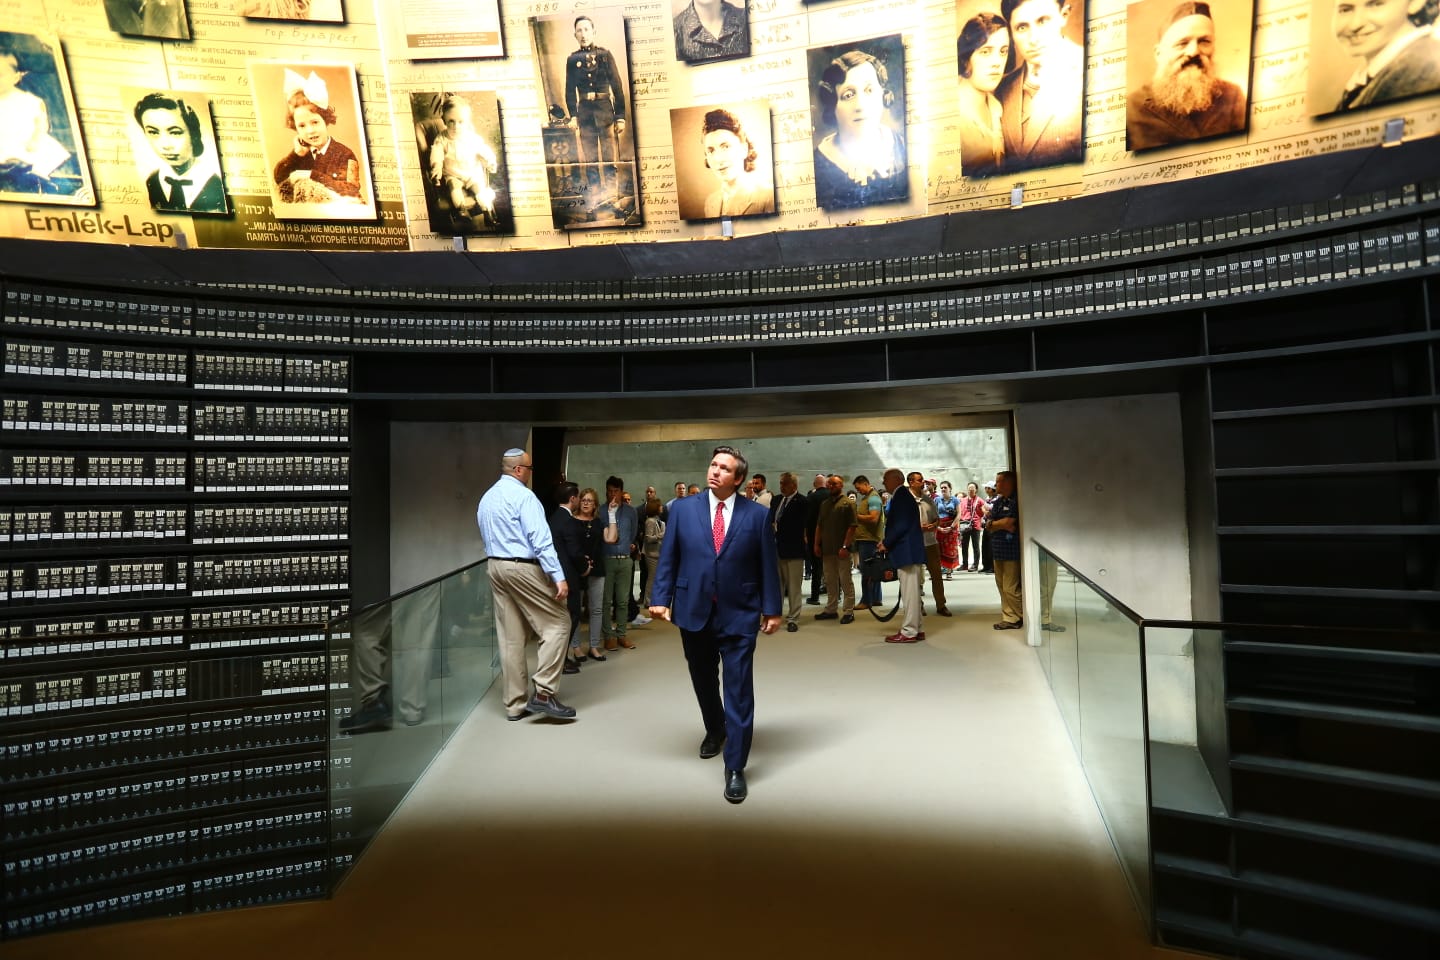   PHOTO RELEASE: Governor Ron DeSantis Participates in Wreath Laying Ceremony at Yad Vashem, Honors the Memory of Jews Who Perished in the Holocaust